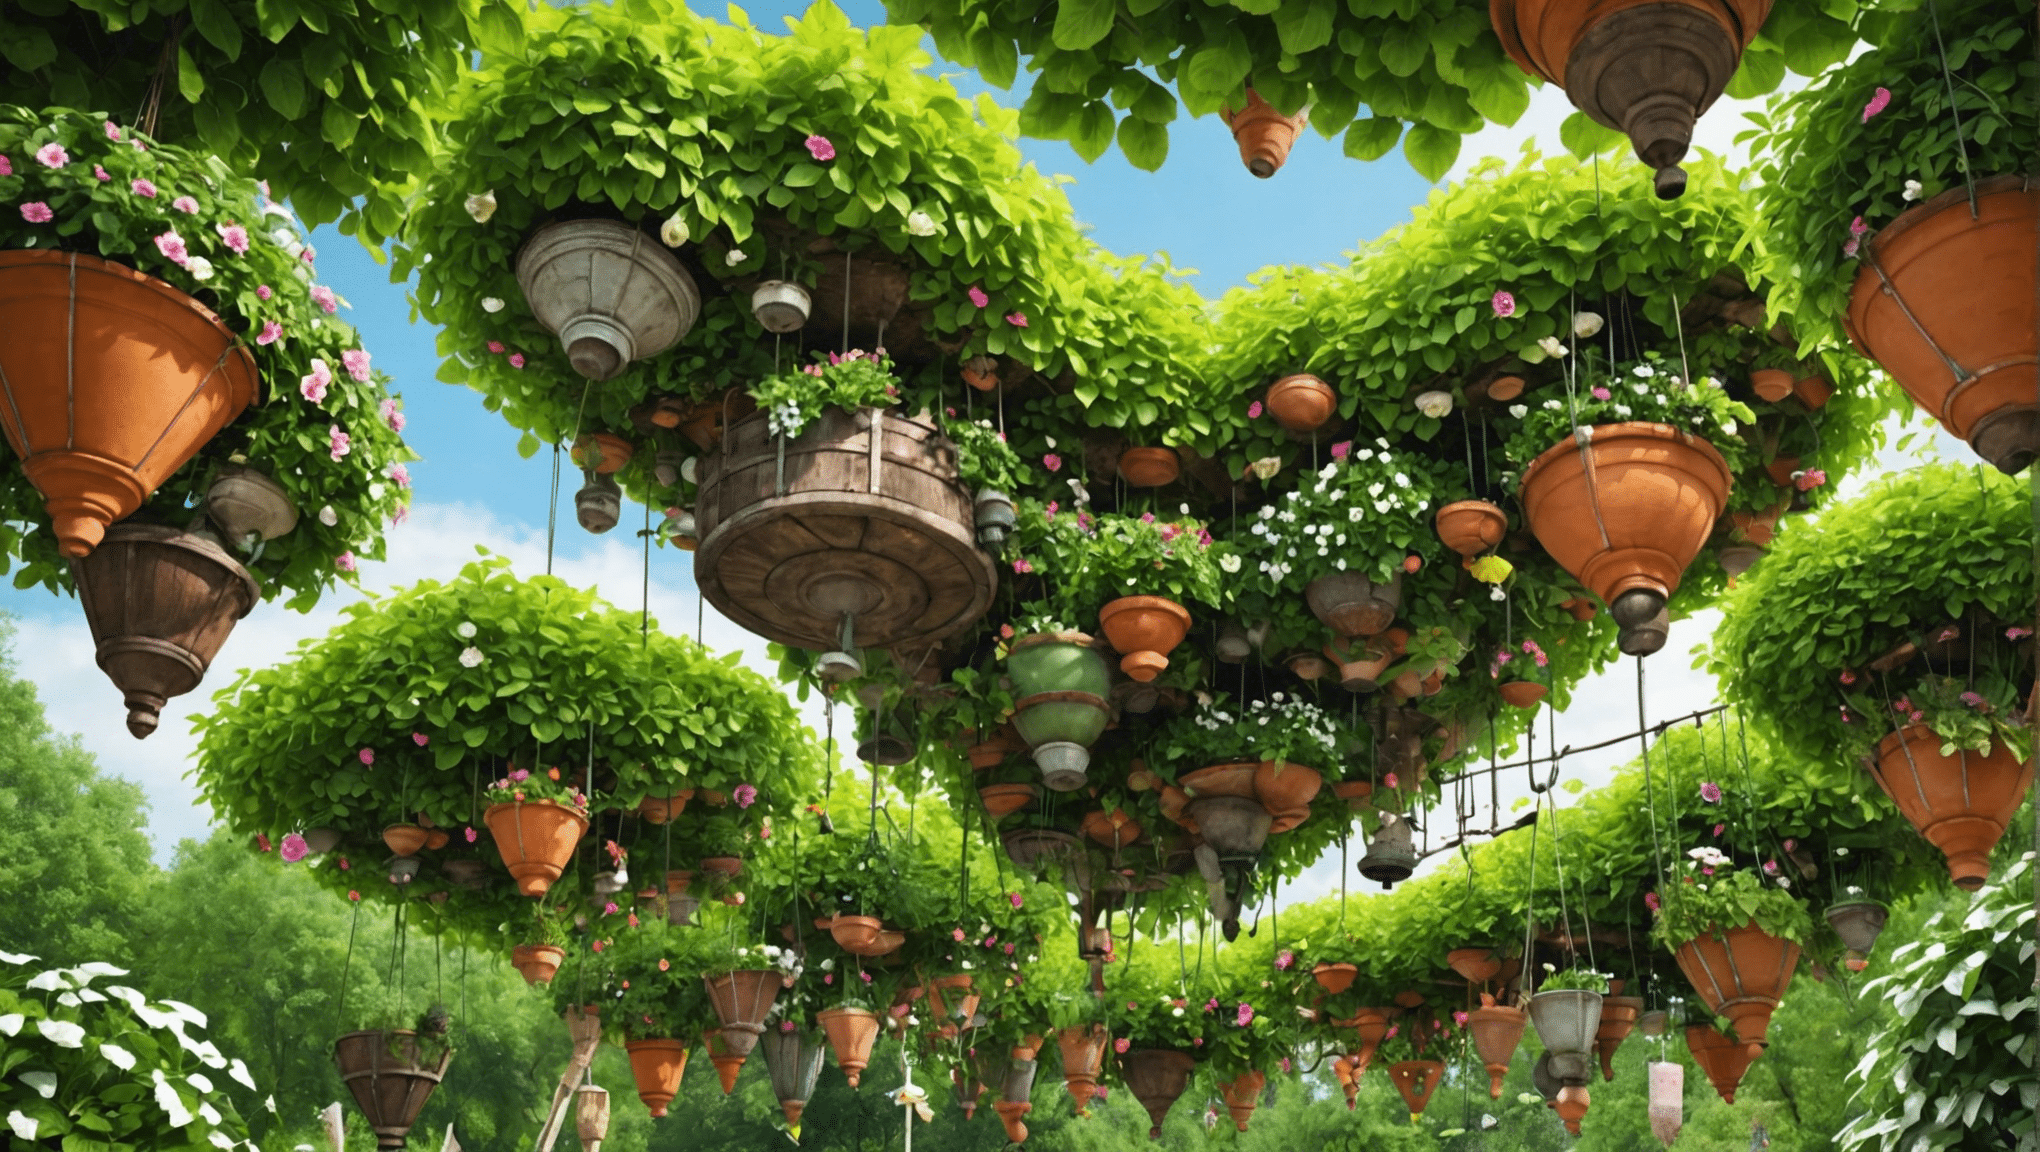 discover creative upside down gardening ideas to maximize space and yield in your garden with expert tips and innovative techniques.